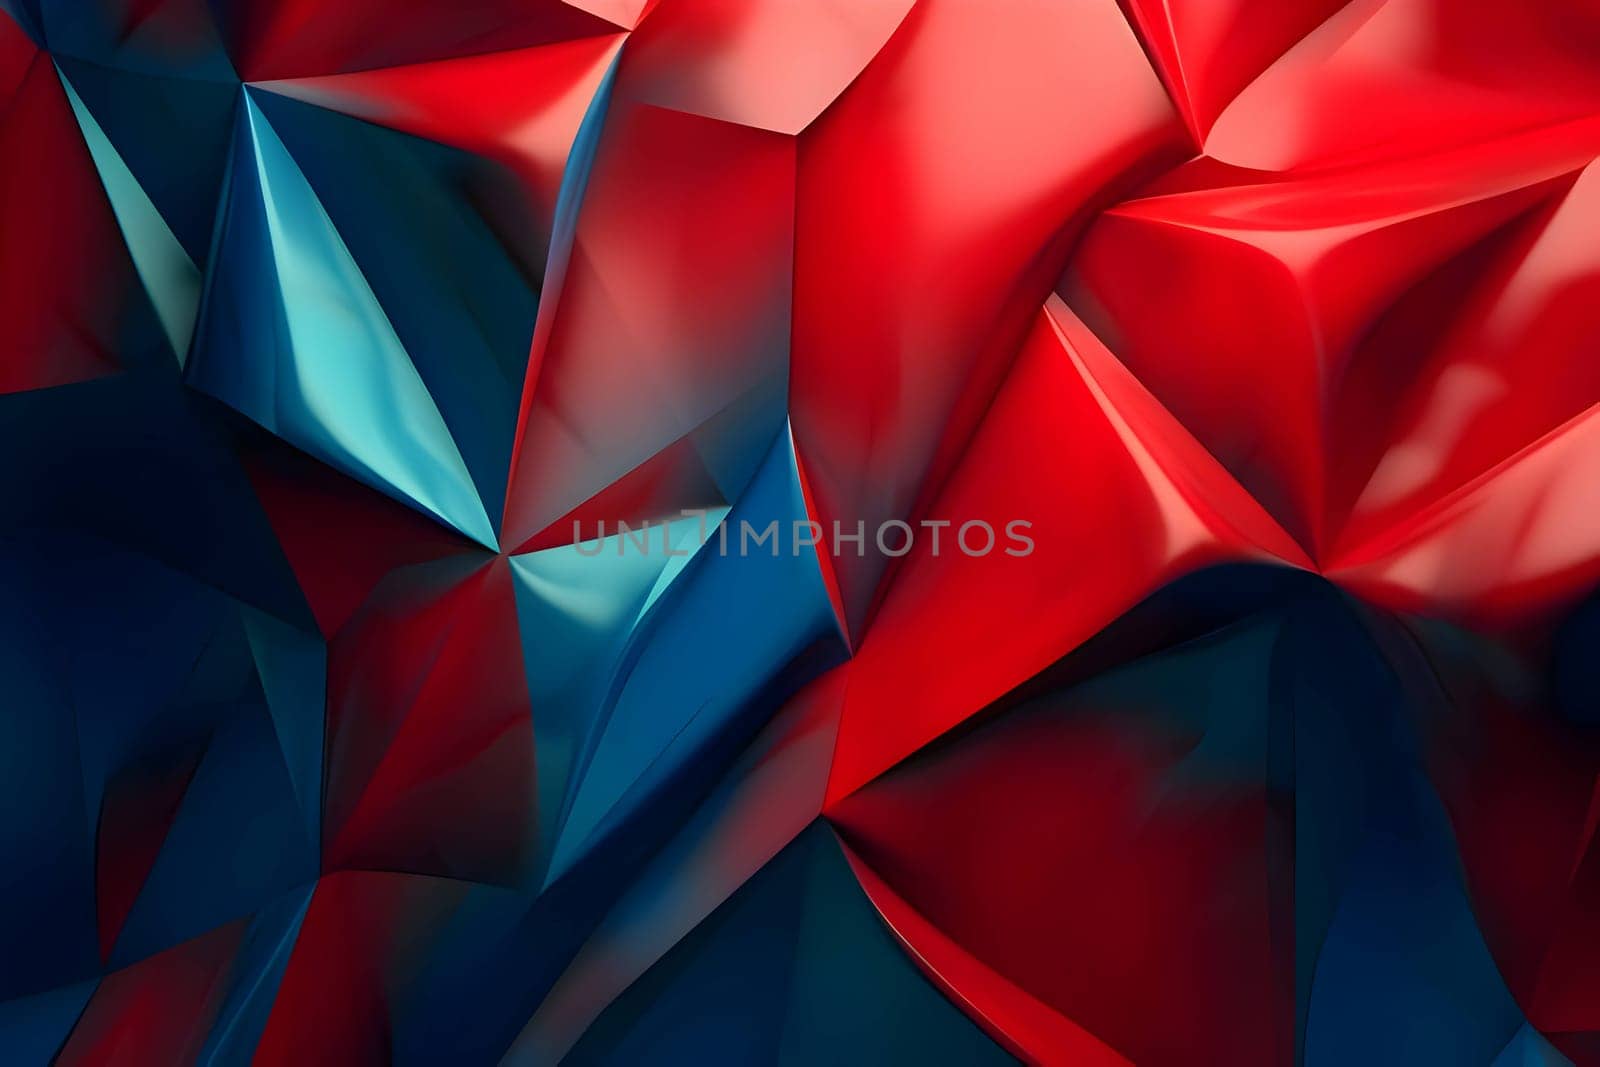 An abstract background wallpaper adorned with geometric forms in shades of red and blue, creating a visually engaging and dynamic design.